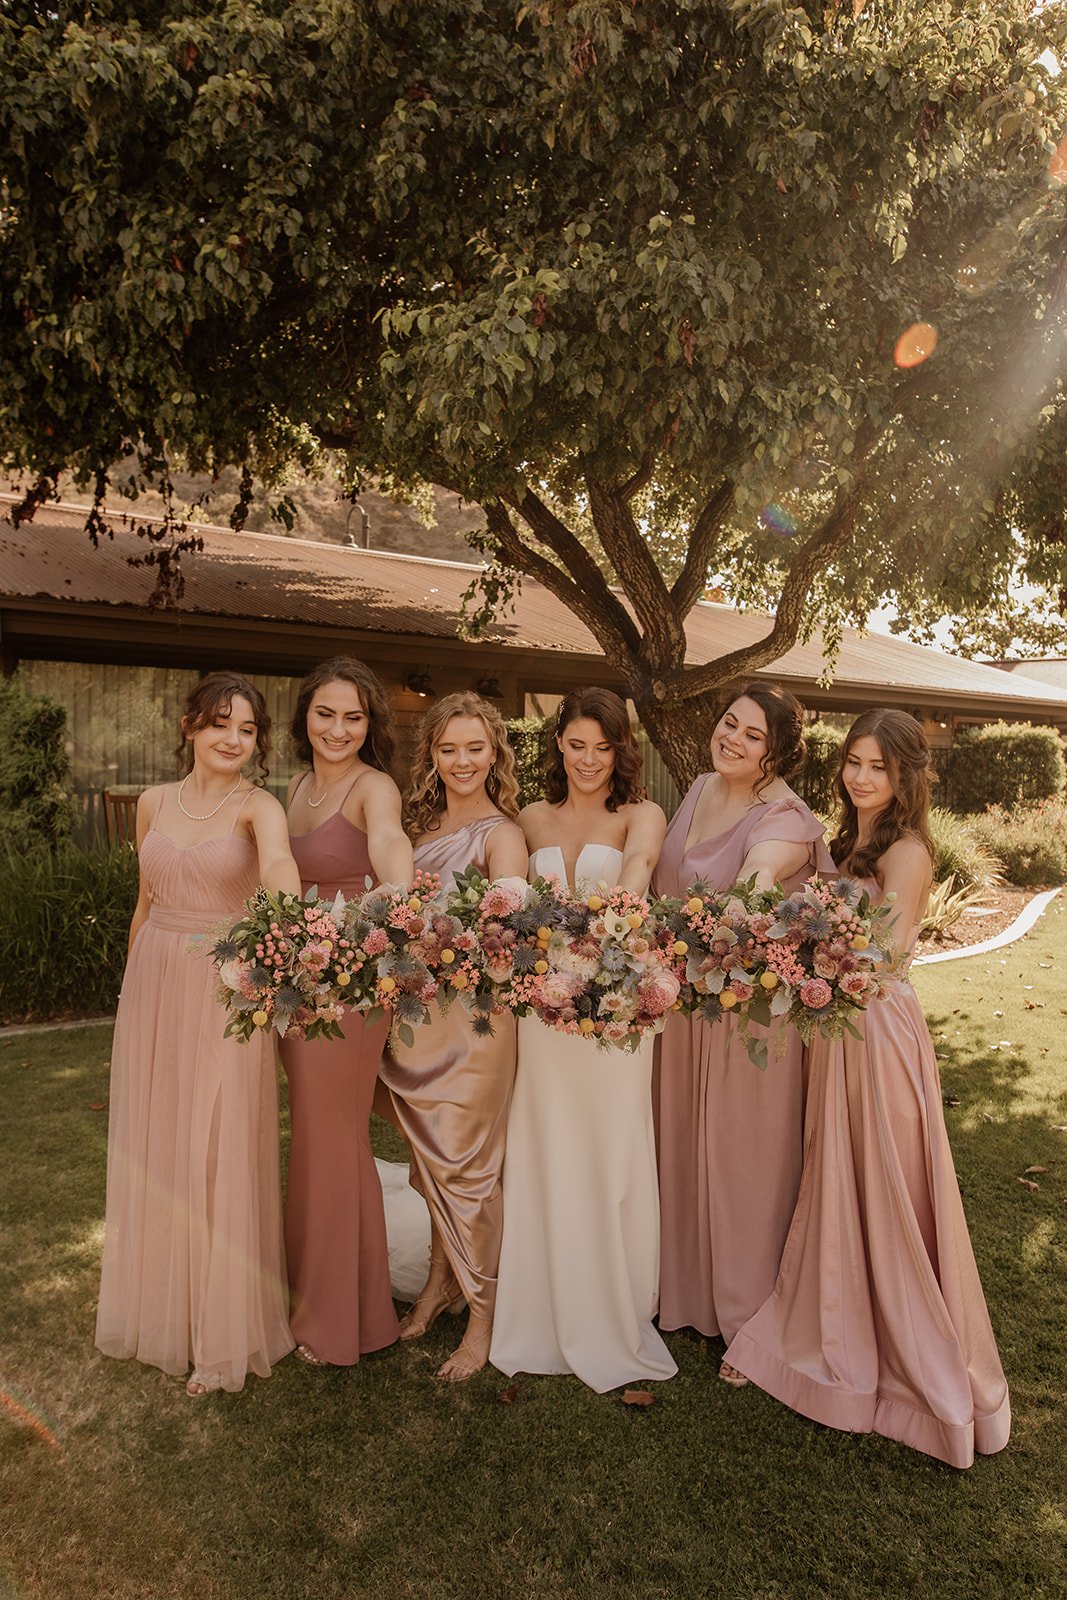 wedding day ceremony in laguna beach hosts beautiful bridal party wearing pinks, rose, and soft neutral bridesmaids dresses